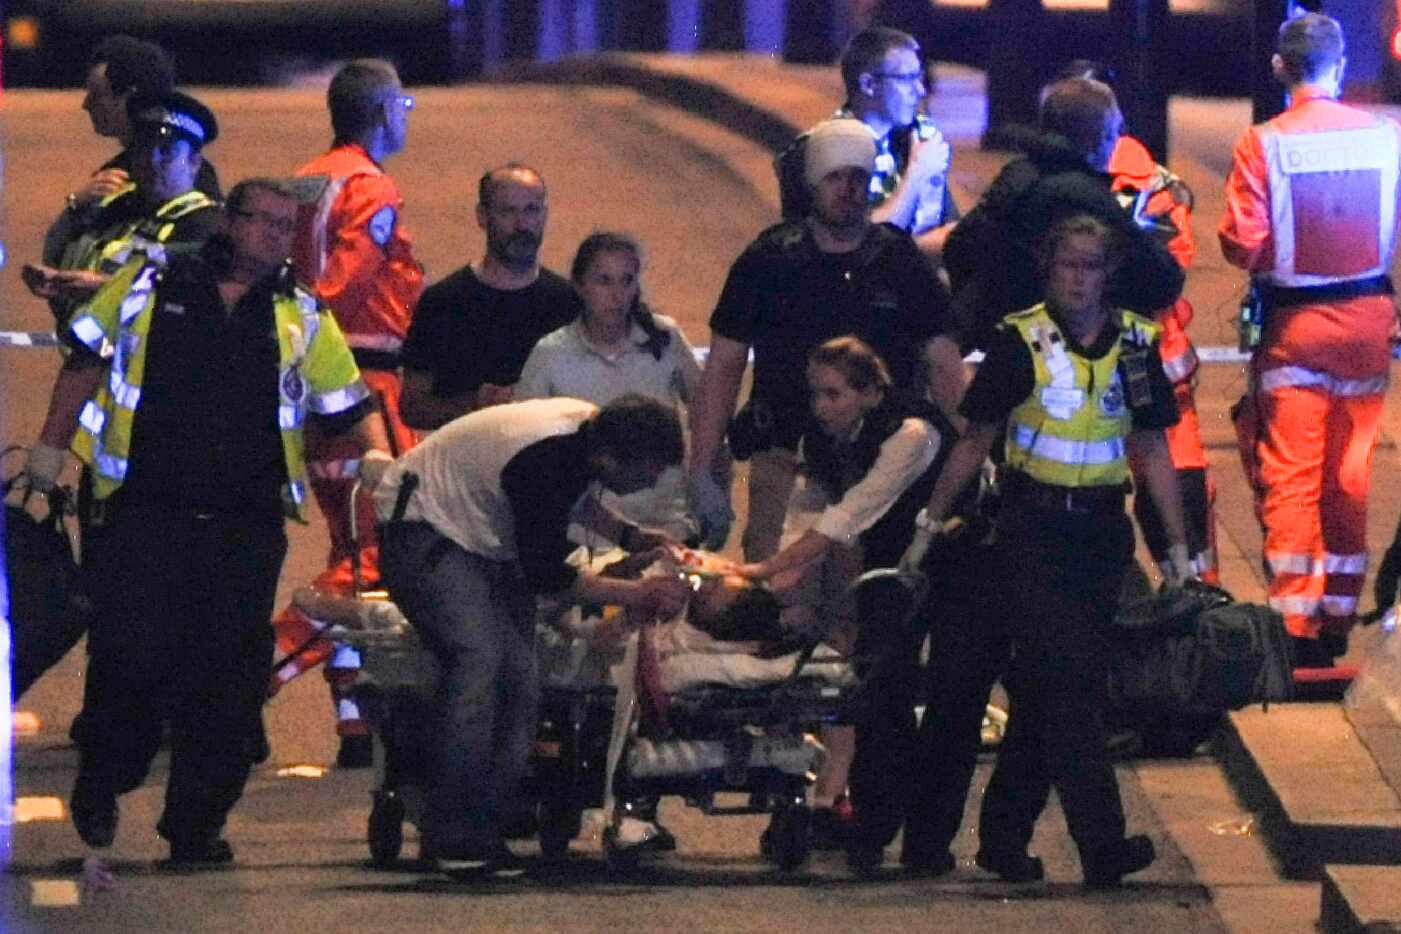 Police and members of the emergency services attend to victims of a terror attack on London...